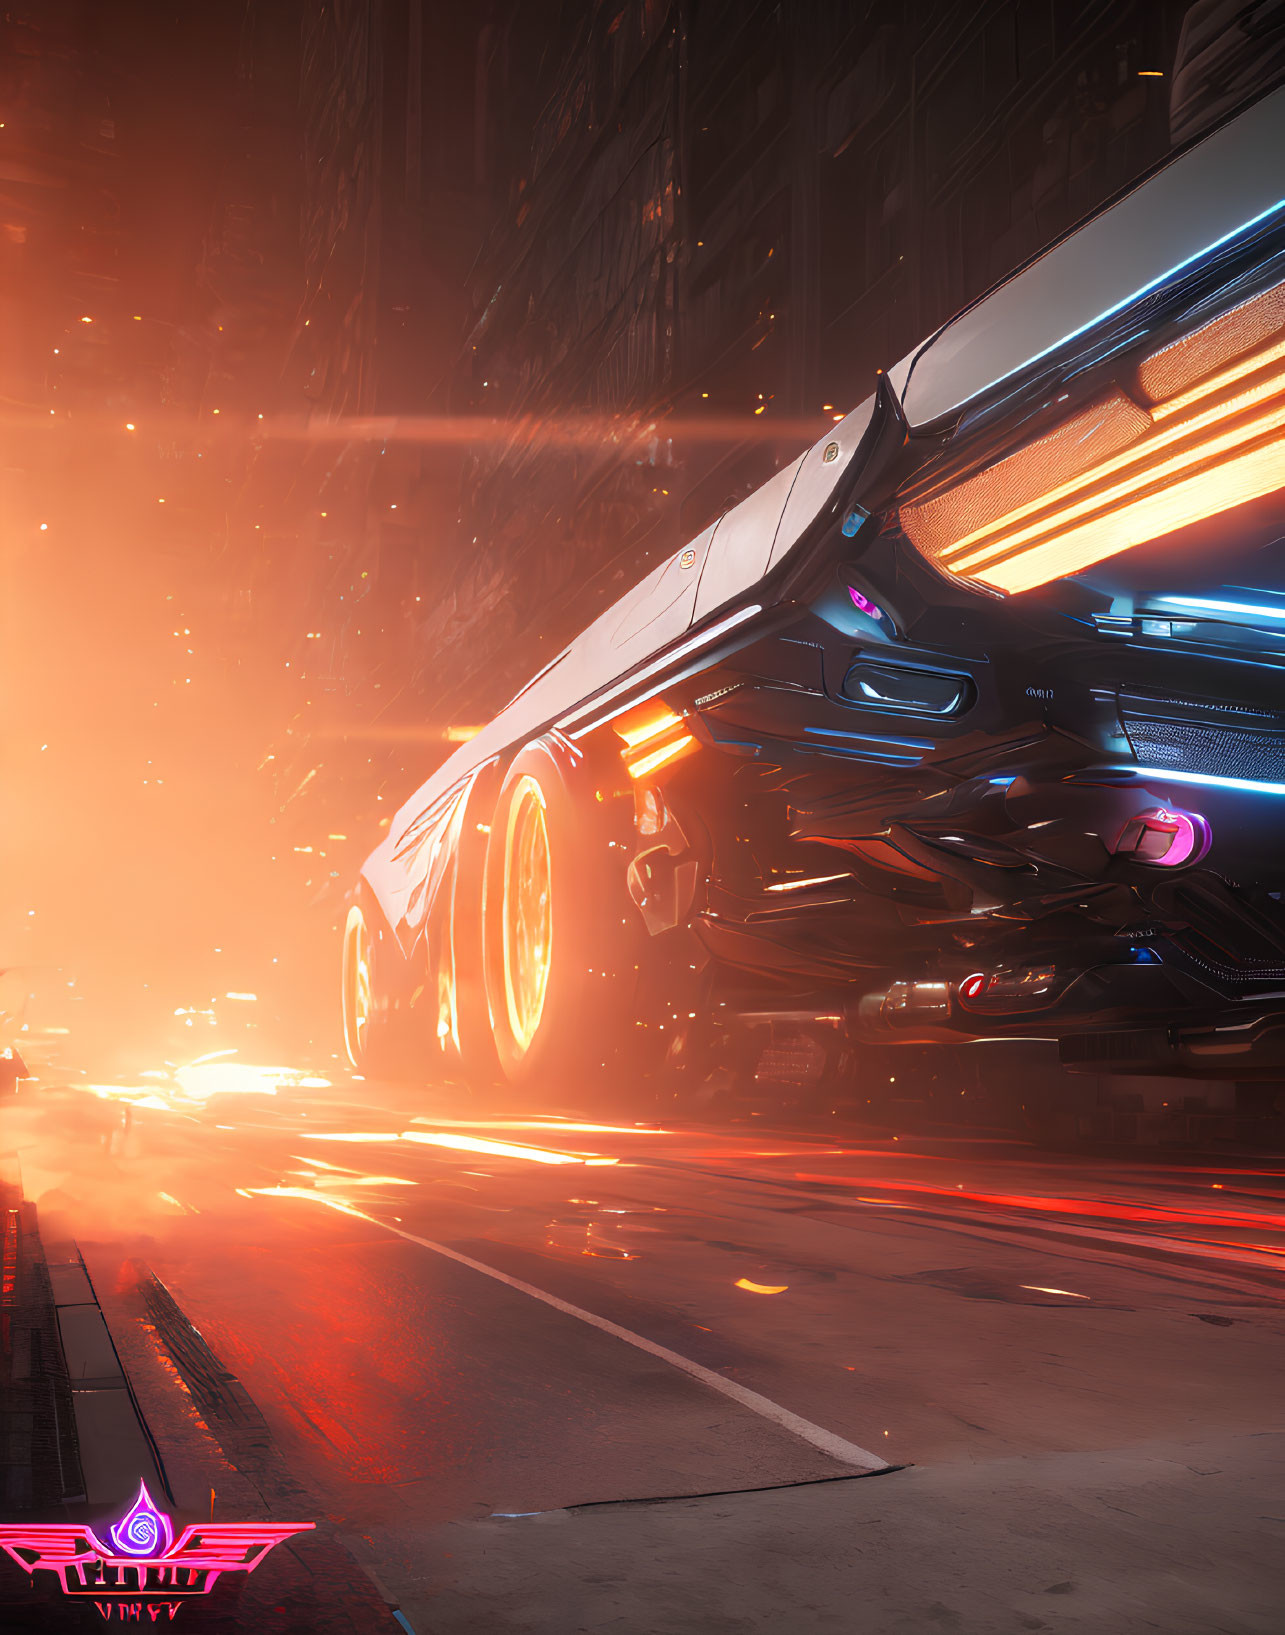 Sleek black car with sparks in neon-lit cityscape